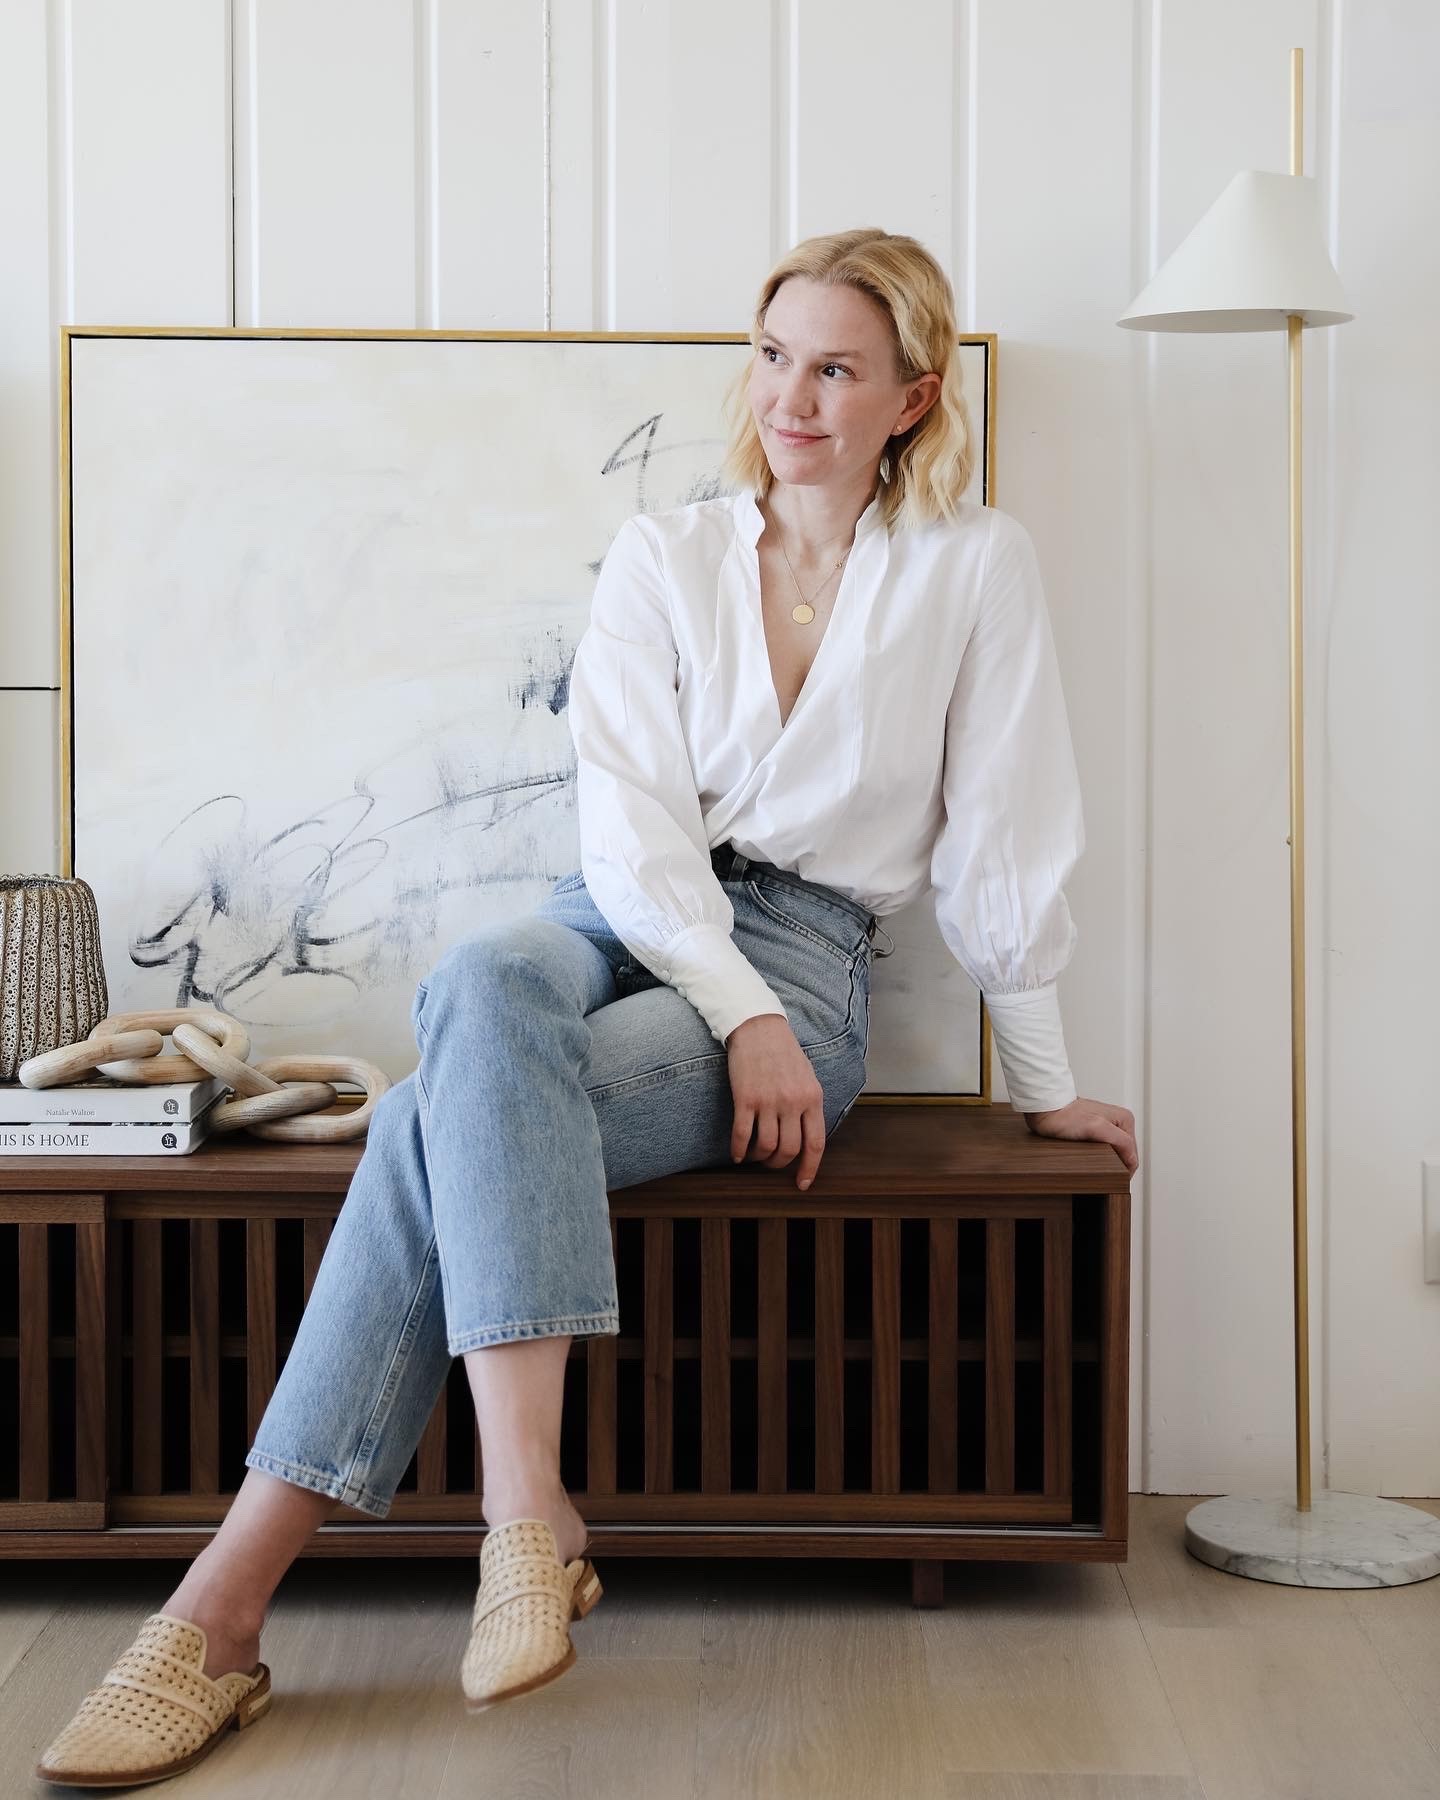 Woman white blouse and jeans in her living room, against a white panel wall.